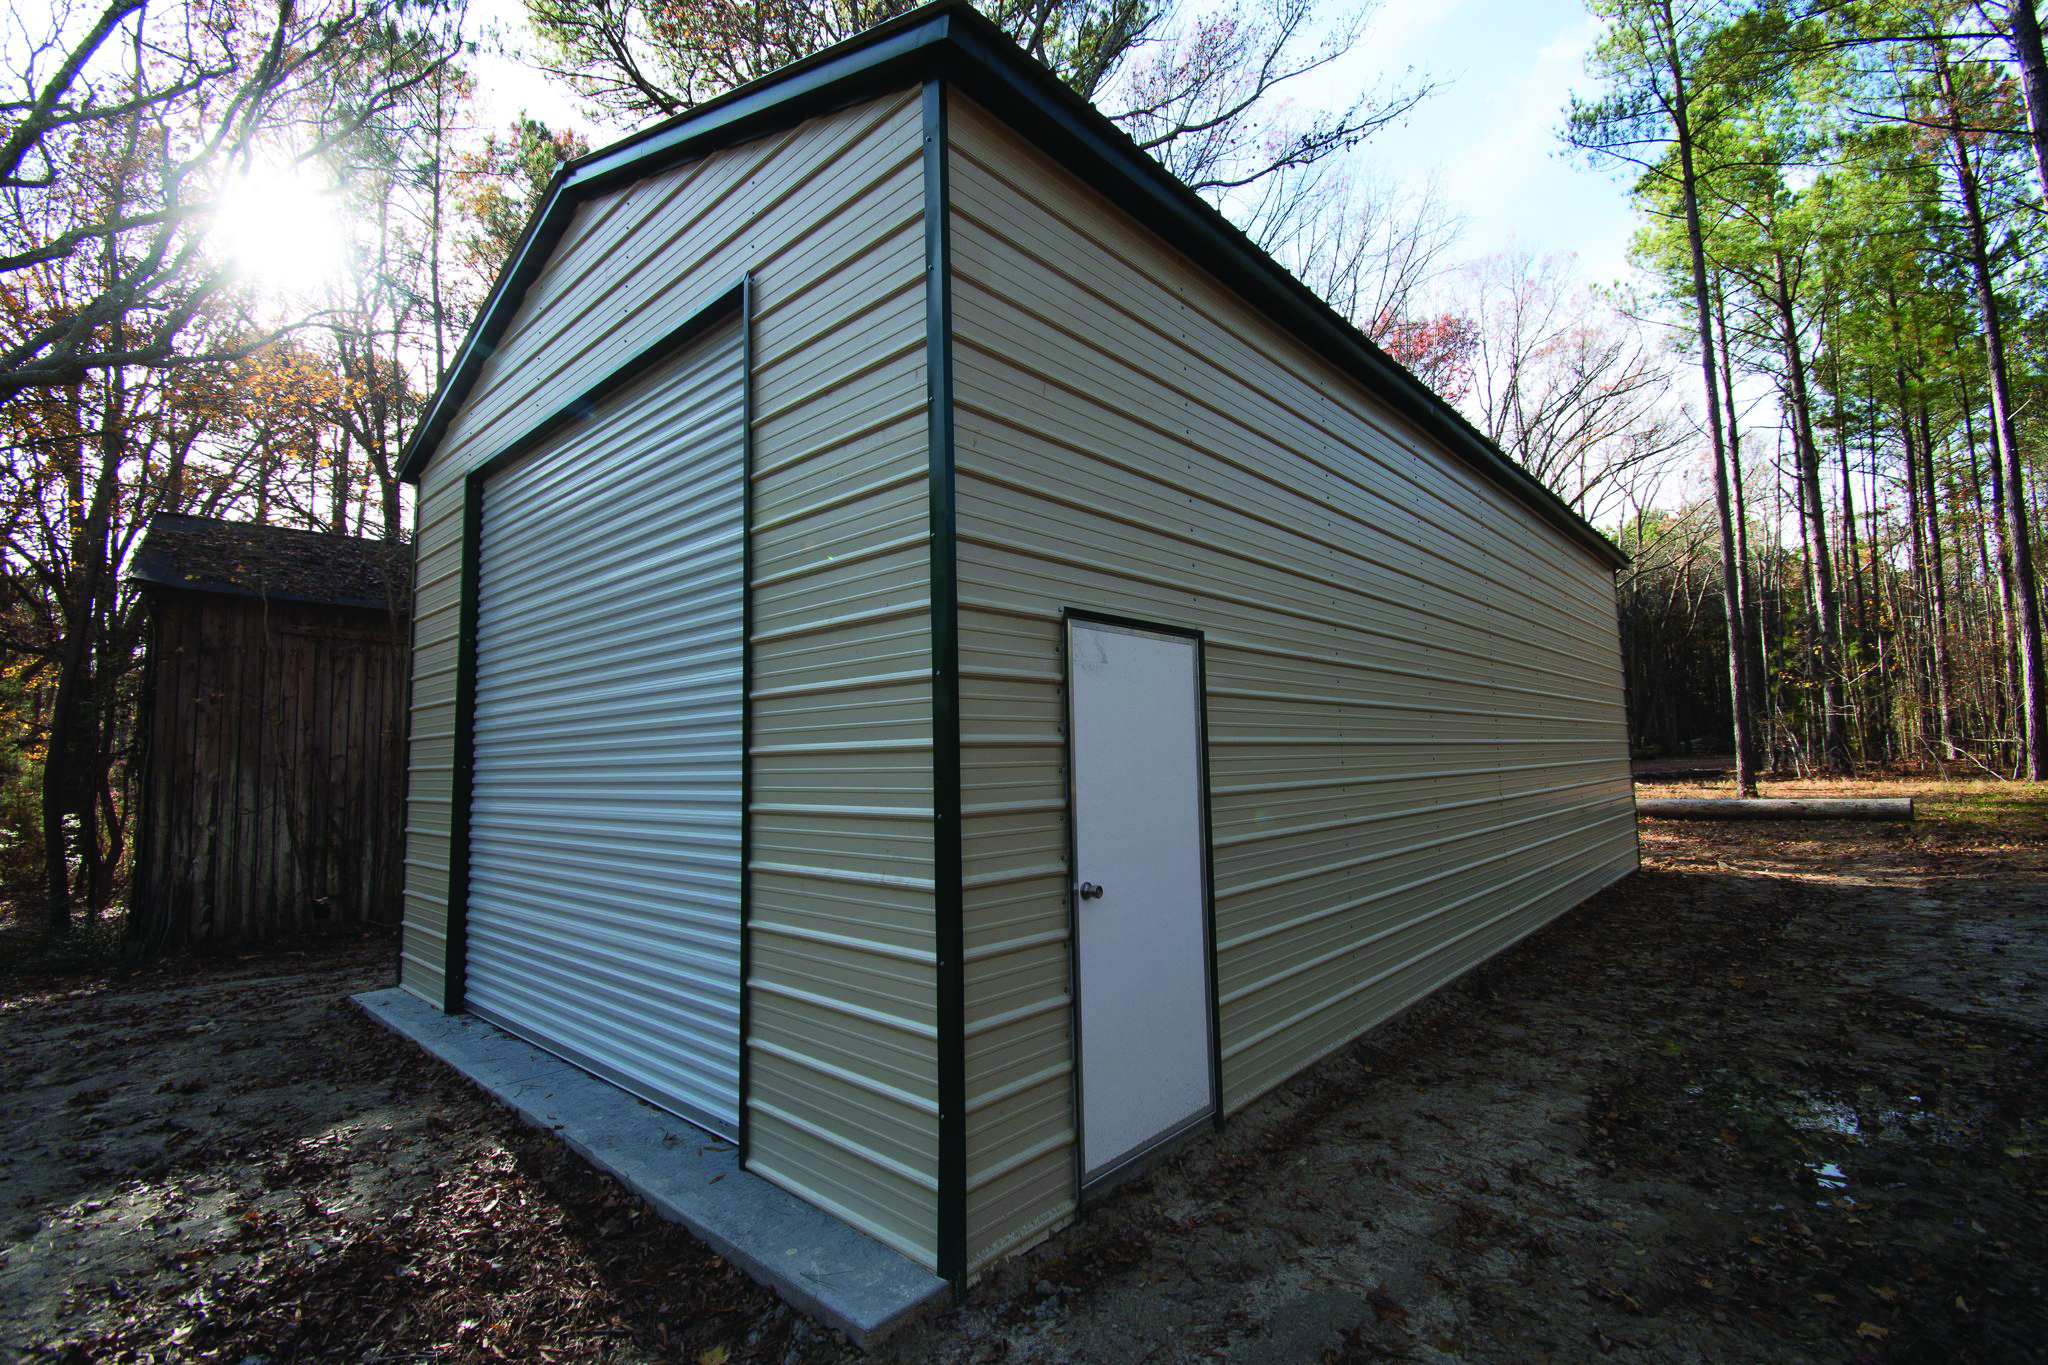 CHOICE SINGLE GARAGE, VERTICAL ROOF  *PHOTO REPRESENTATION IS AN EXAMPLE ONLY / ACTUAL PRODUCT MAY VARY